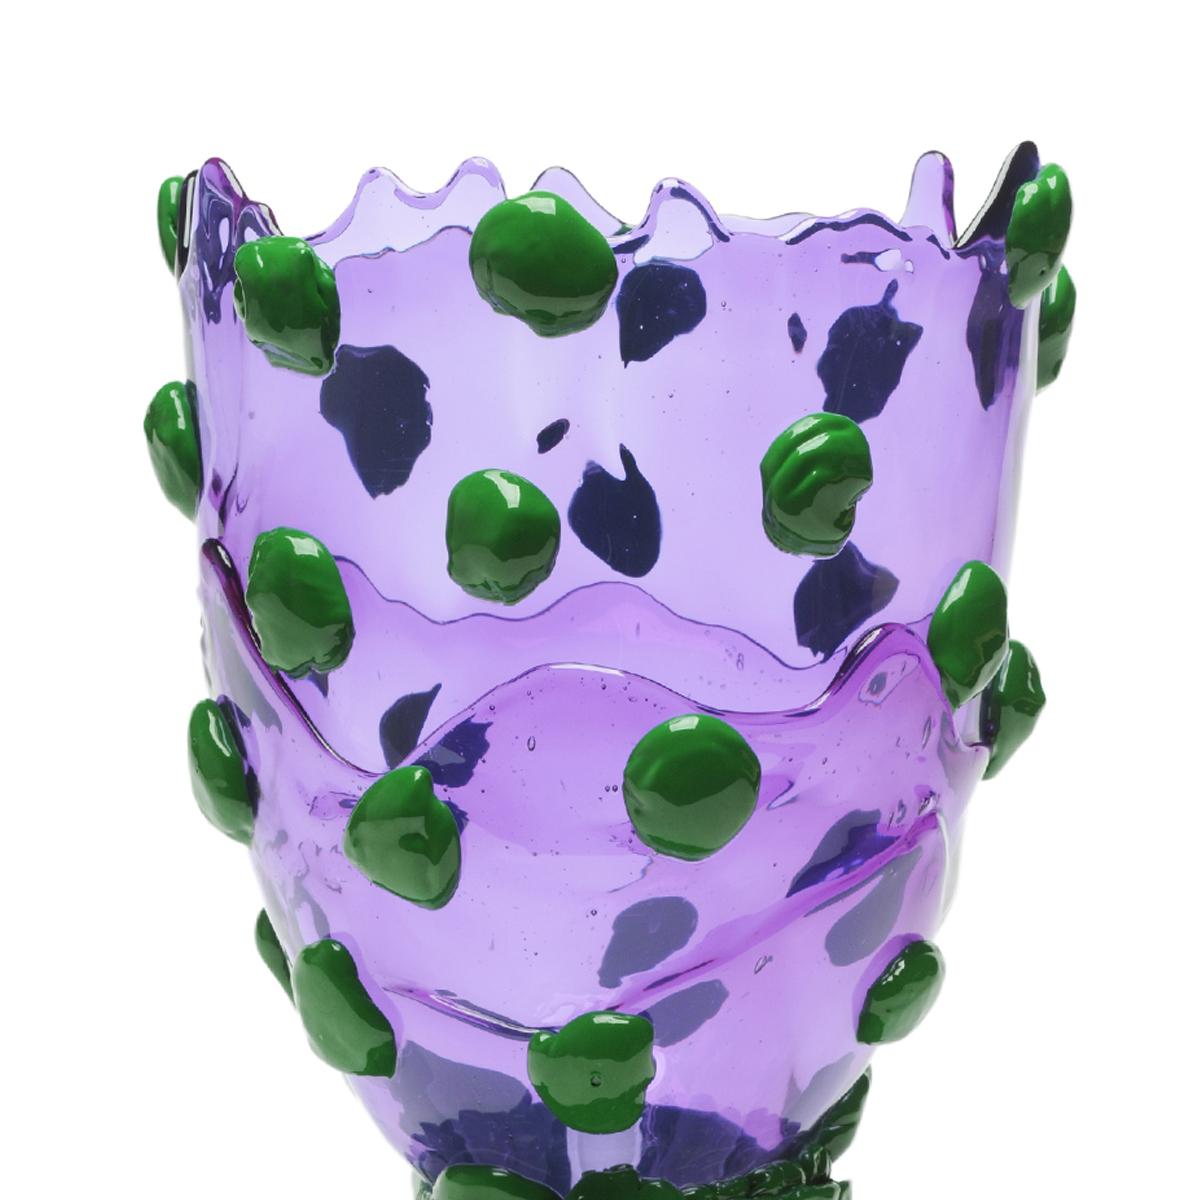 Nugget vase, clear purple, matt green.
Vase in soft resin designed by Gaetano Pesce in 1995 for Fish Design collection.

Measures: L - Ø 22cm x H 36cm
Colours: clear purple, matt green.
Other sizes available.
Vase in soft resin designed by Gaetano